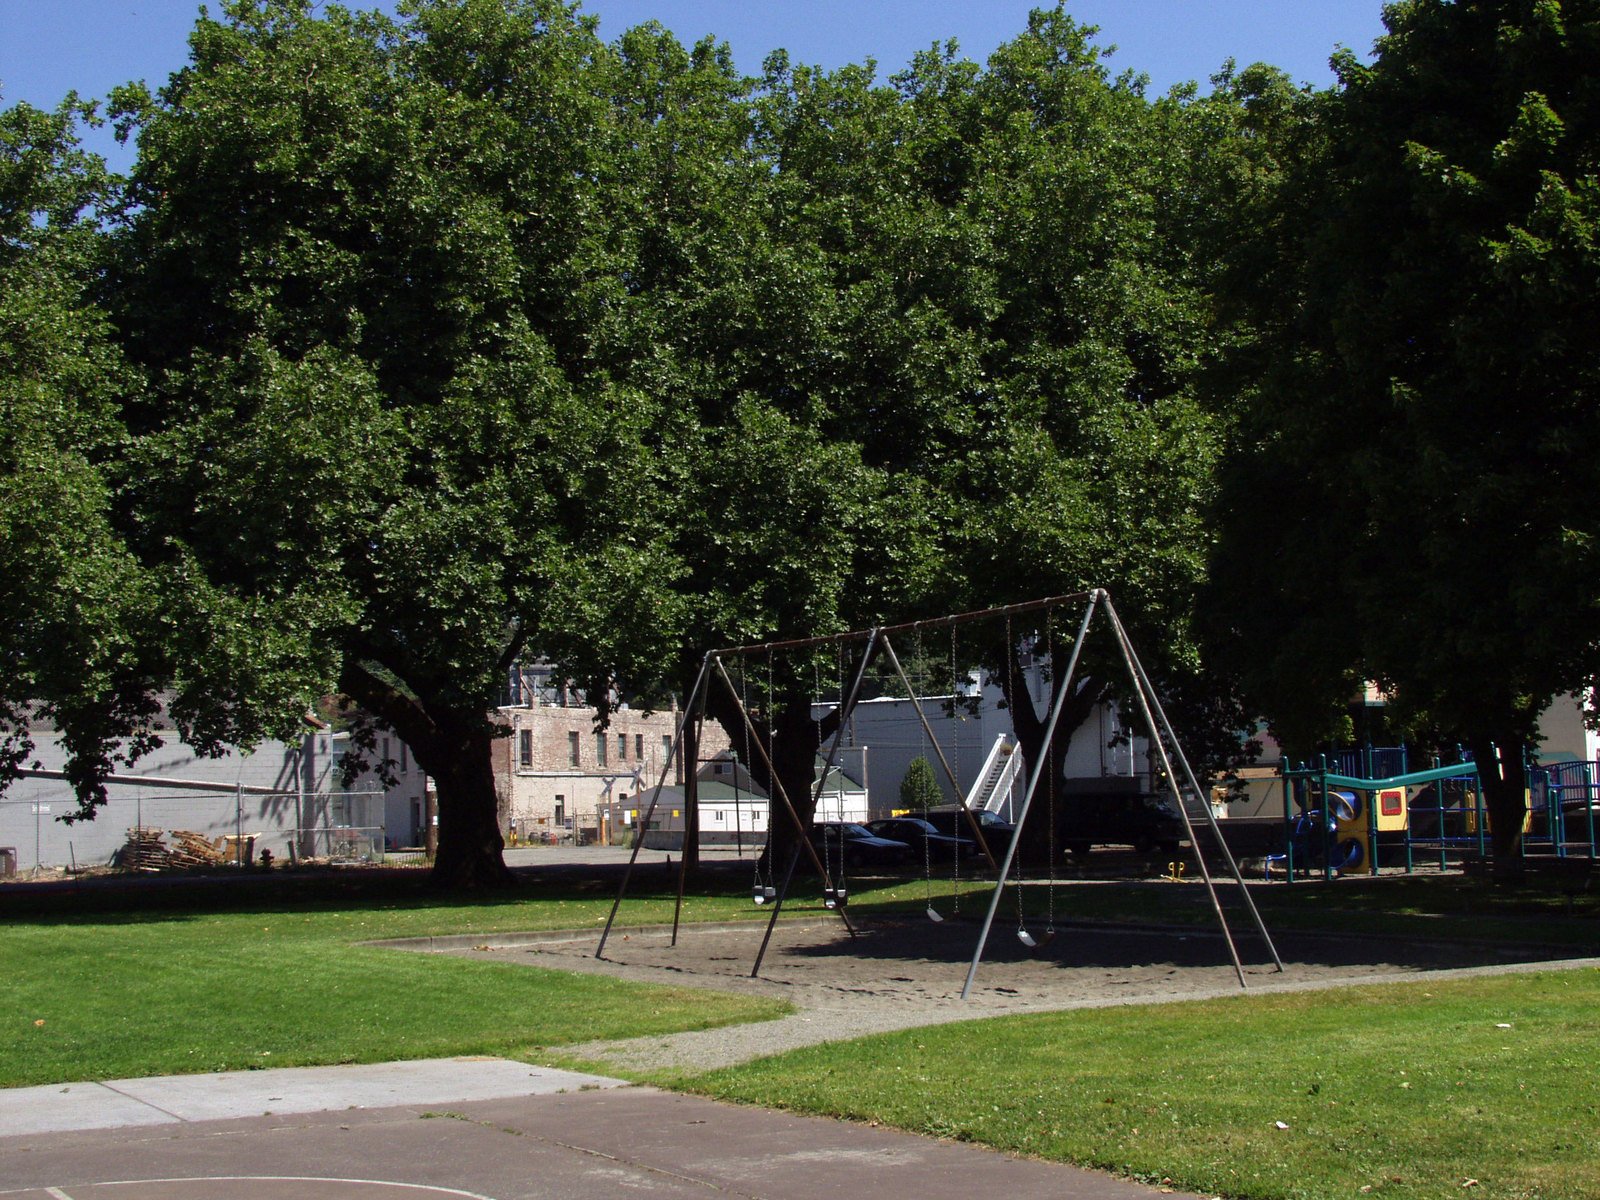 this is a playground with a swing set in it